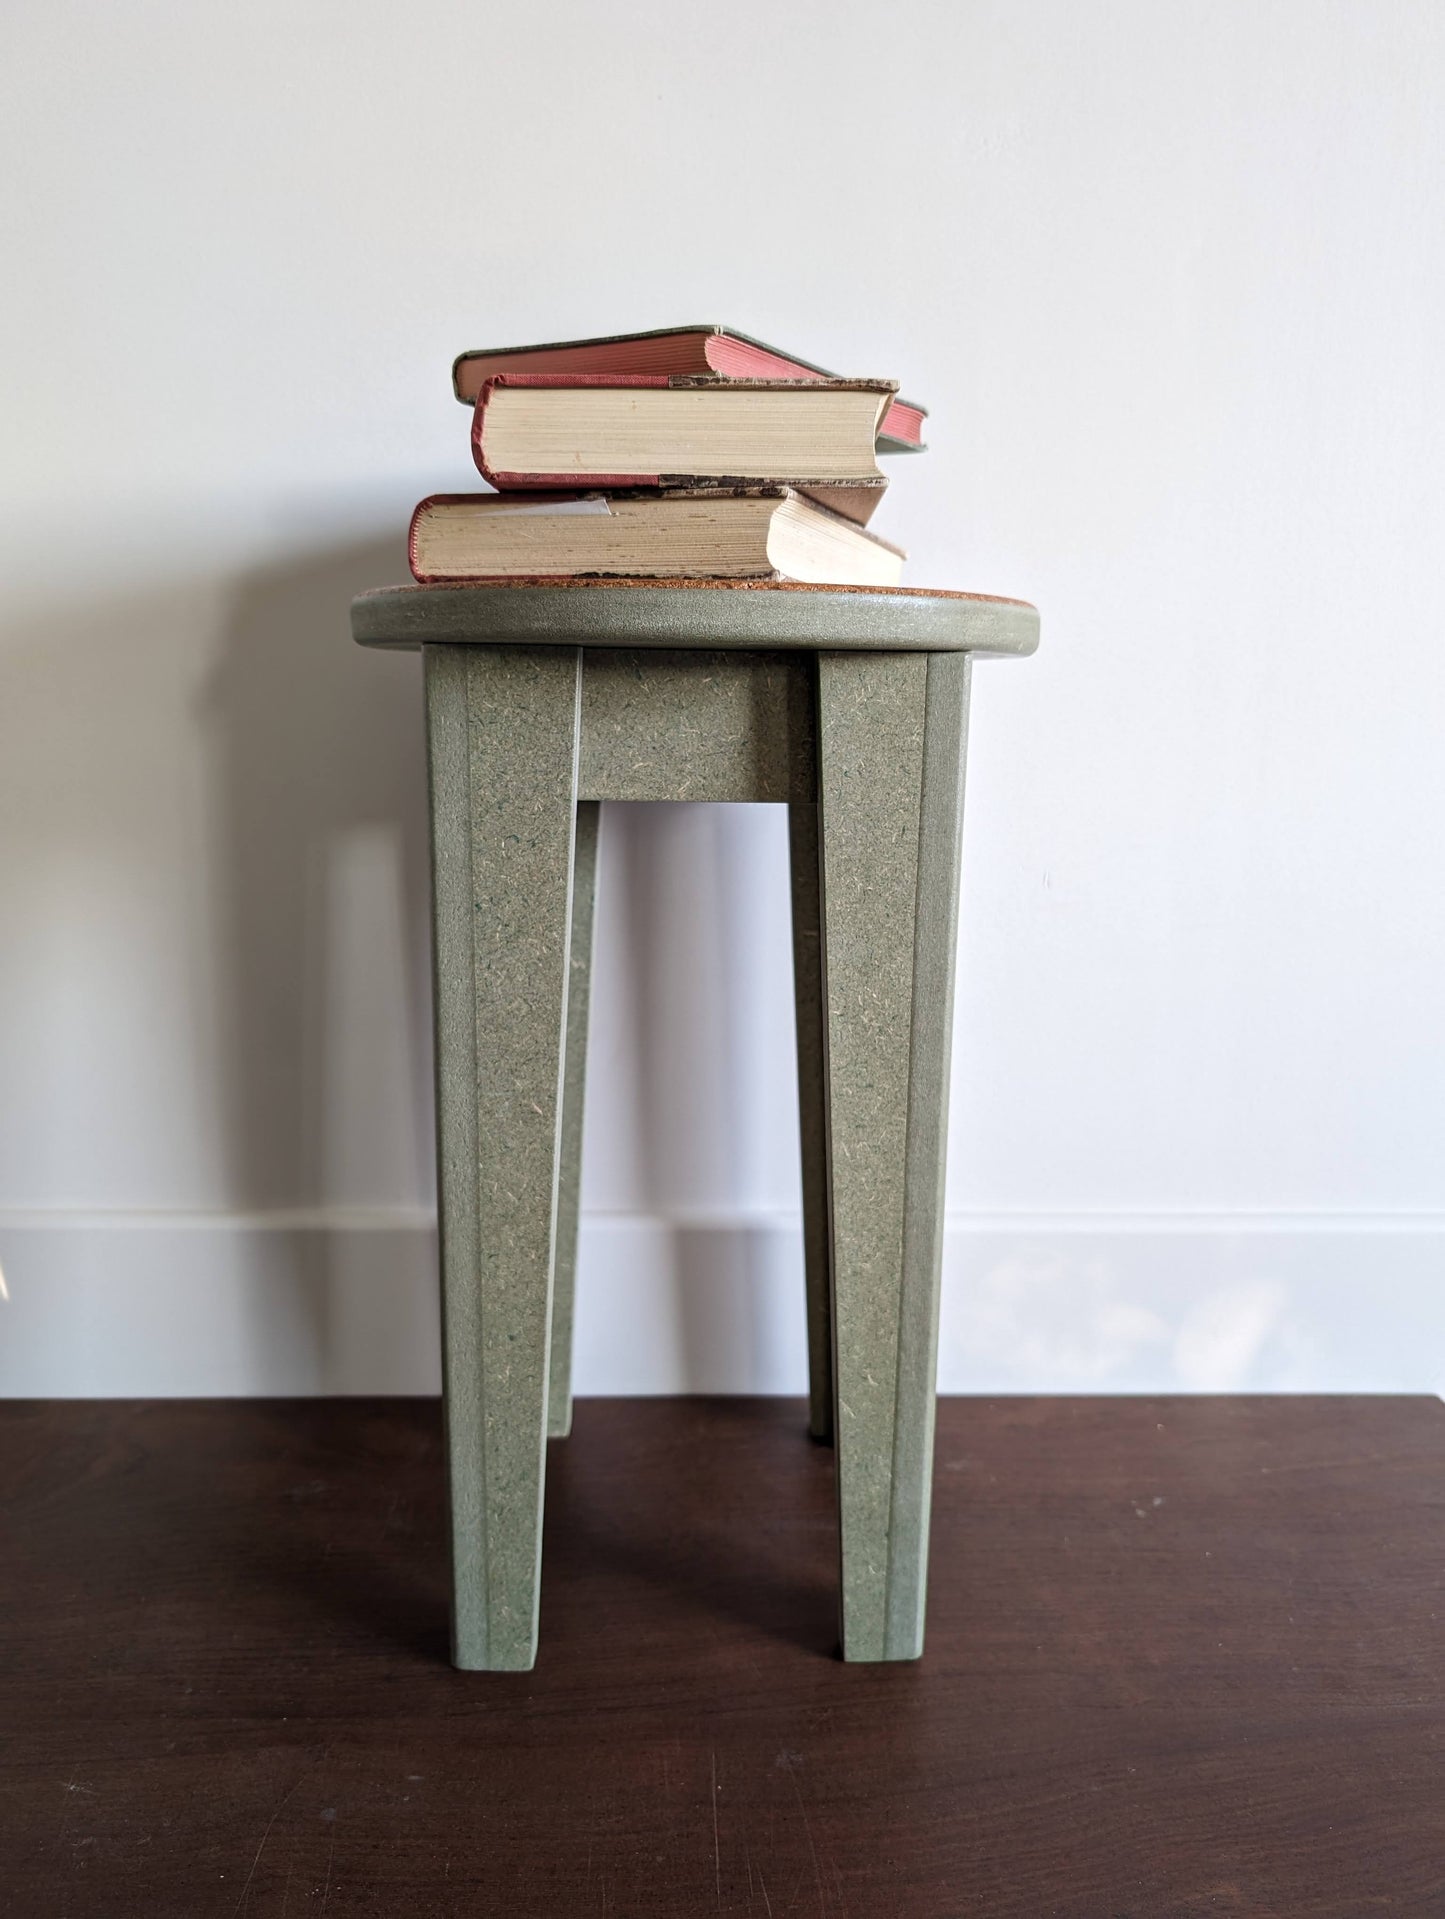 The stool in MDF